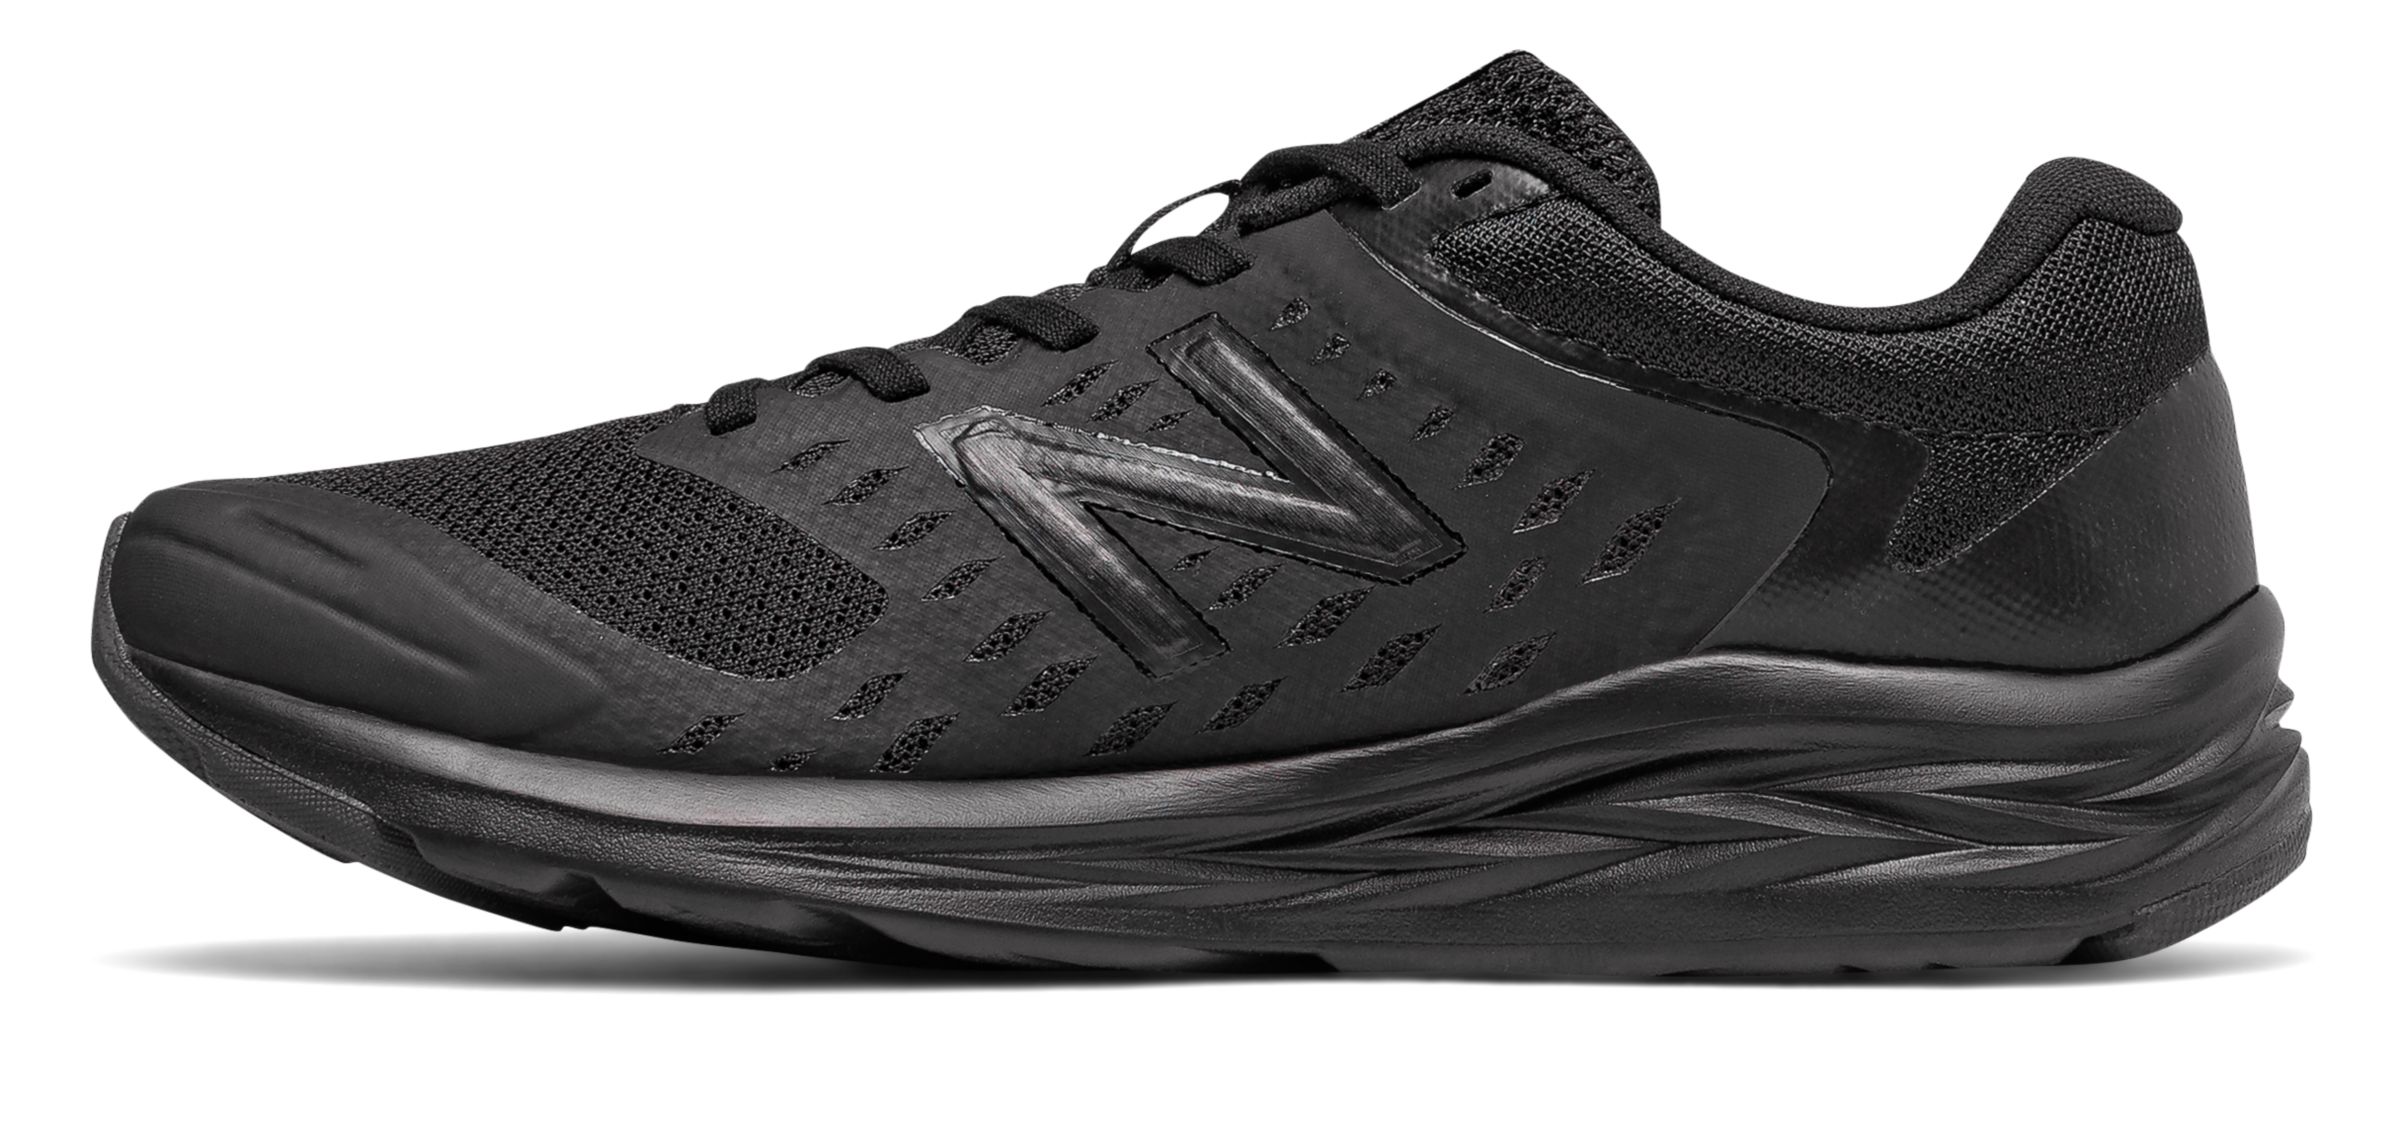 New Balance W490-V5 on Sale - Discounts Up to 49% Off on W490LK5 at Joe's  New Balance Outlet